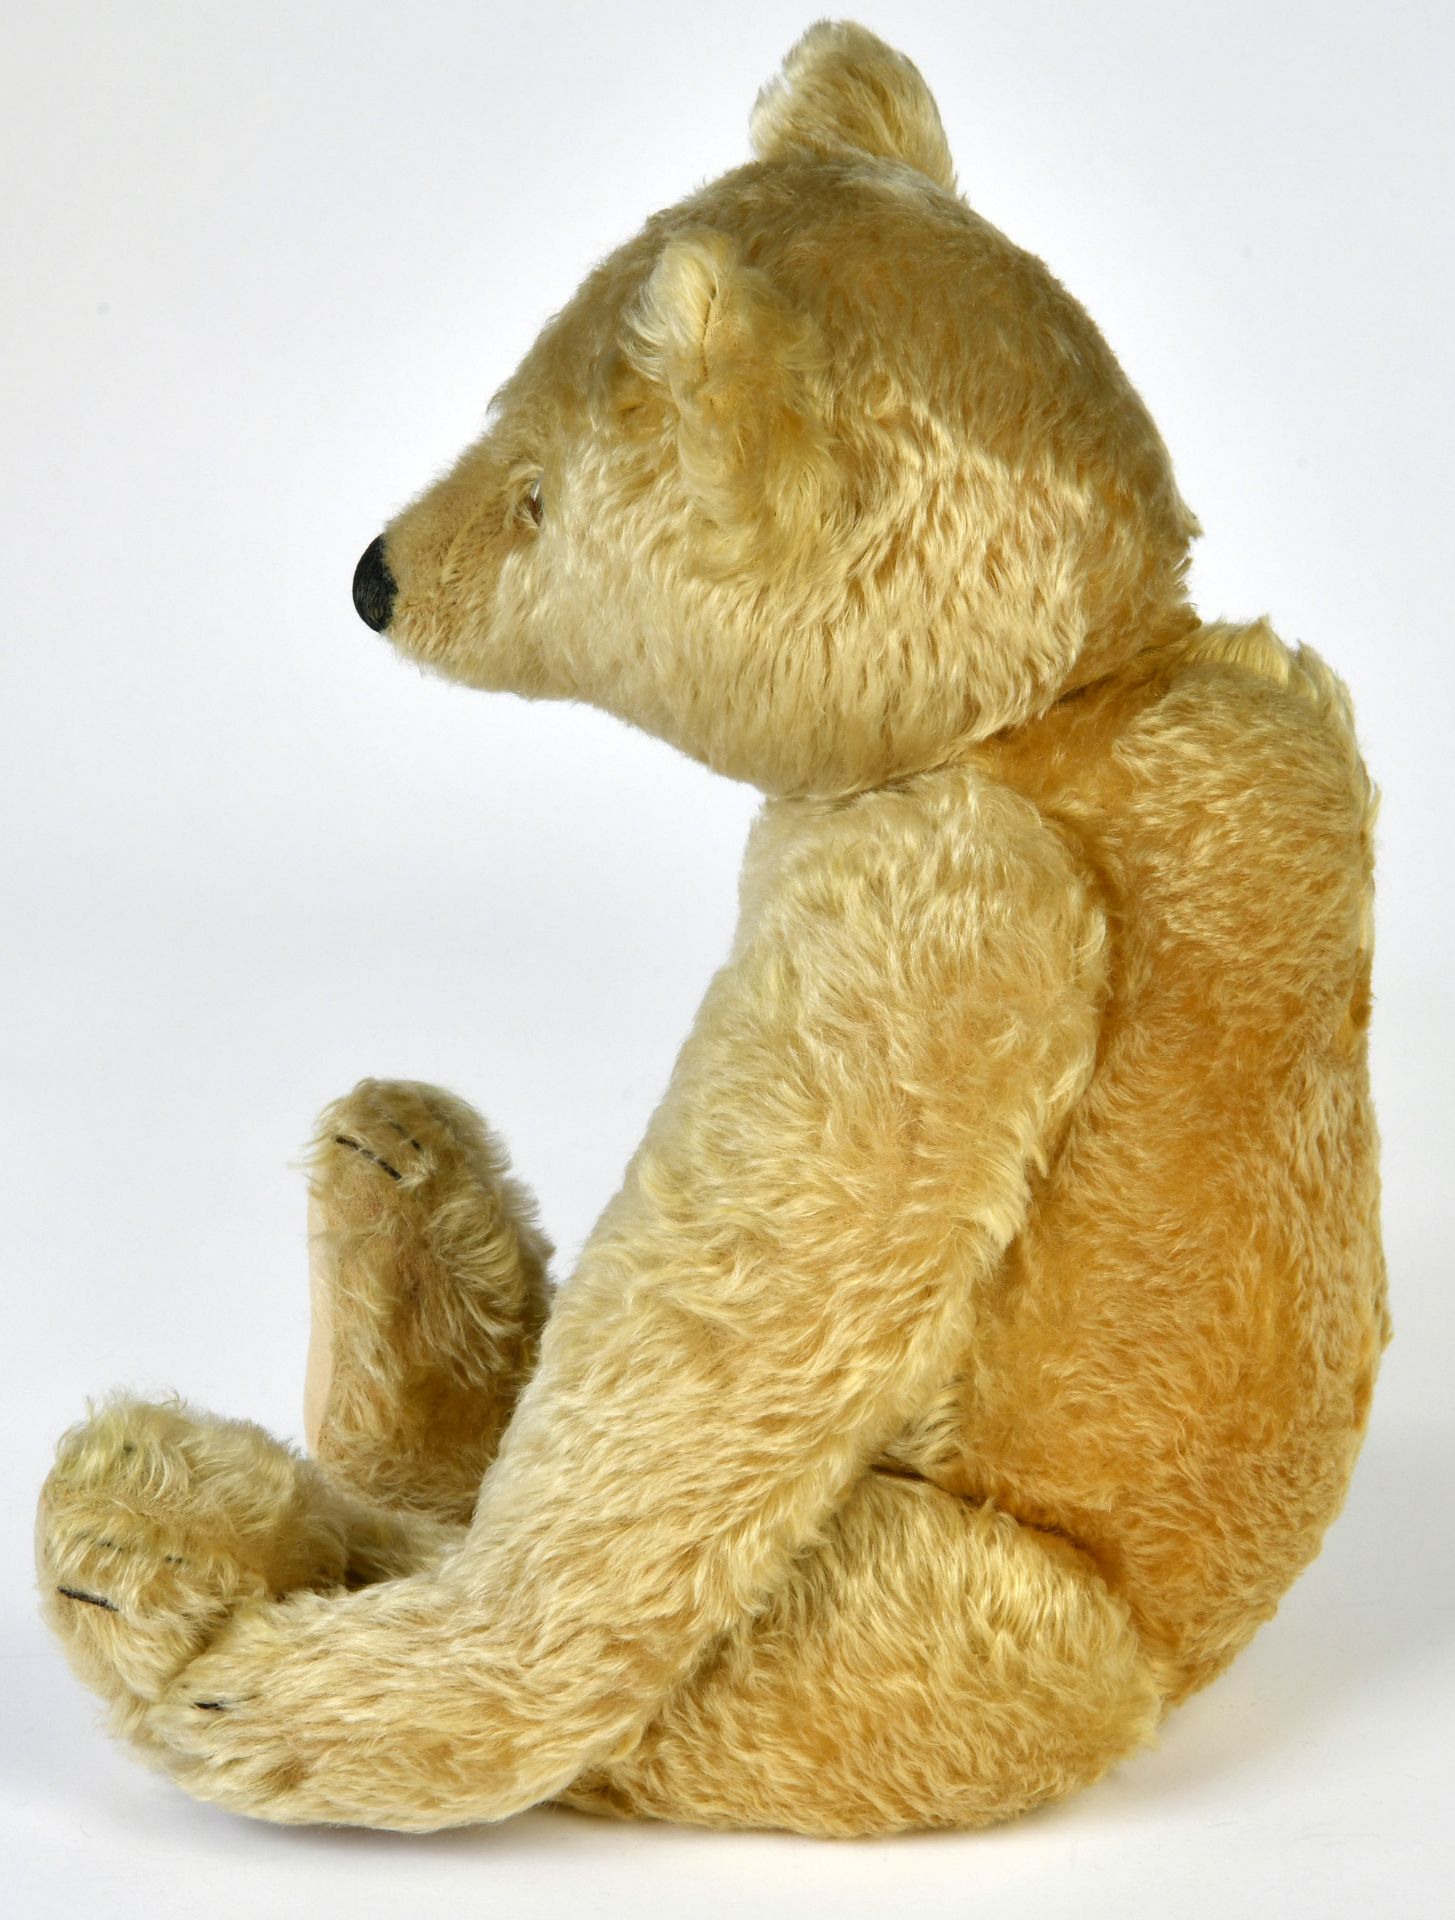 Steiff, bear, 60 cm, ca. 1920s, yellow, with buttom, expressive, very good condition - Image 2 of 3